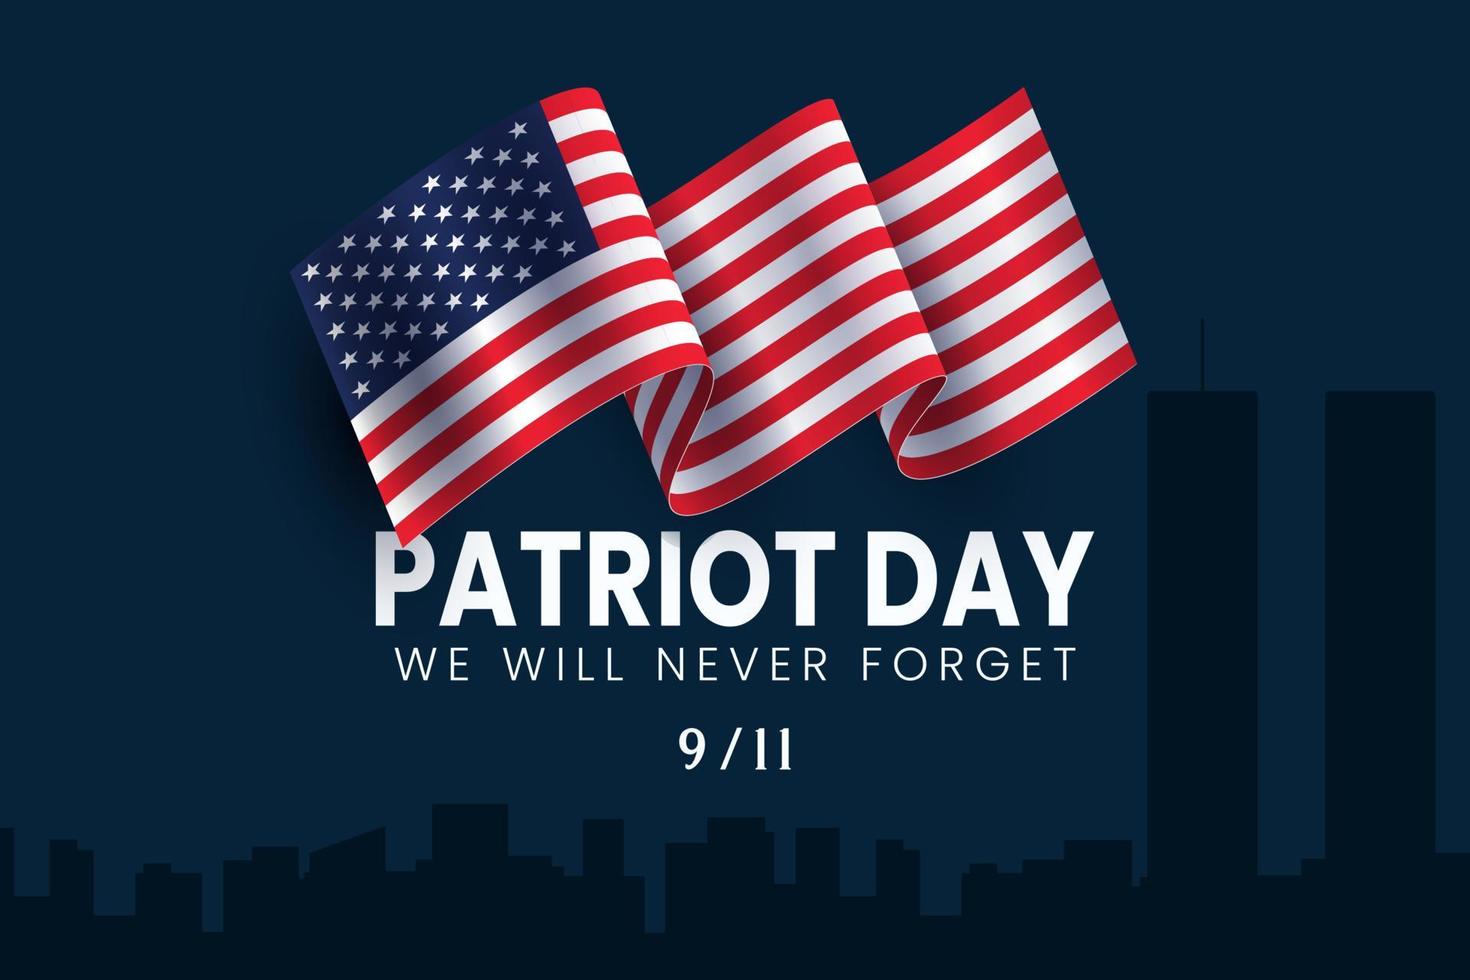 911 USA Never Forget September 11, 2001. Vector conceptual illustration of Patriot Day Background poster or banner. Dark background, red and blue colors.